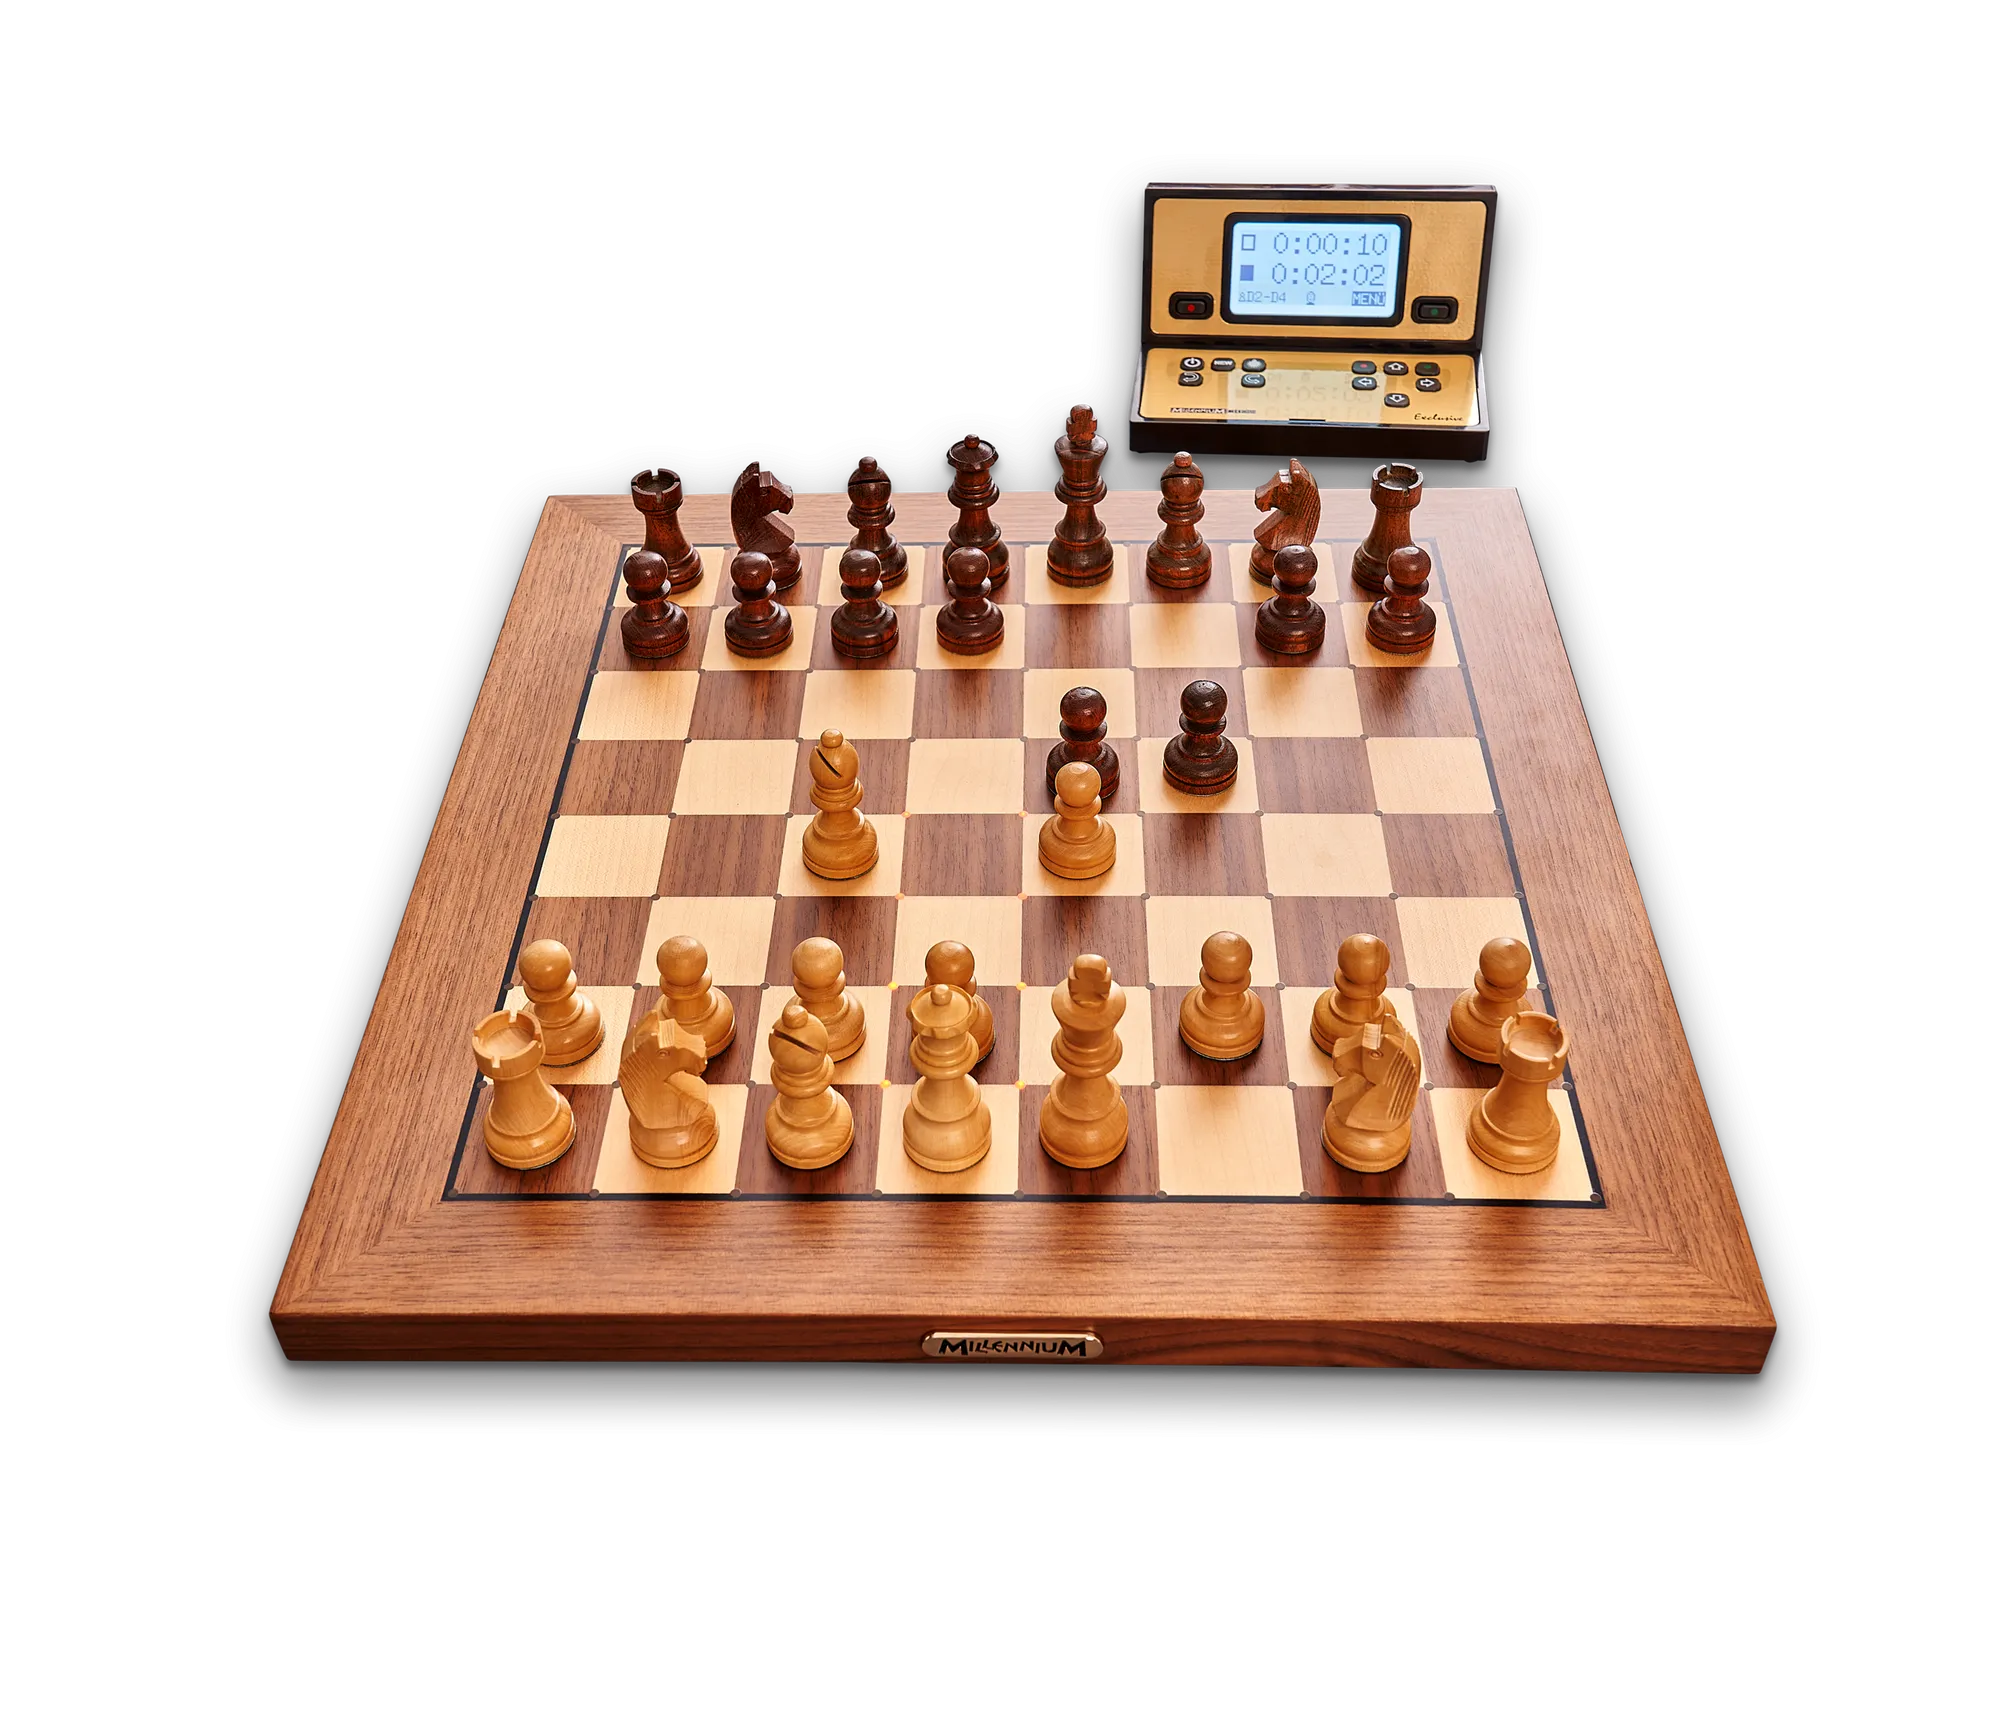 engines - How to determine the value of a piece from scratch? - Chess Stack  Exchange